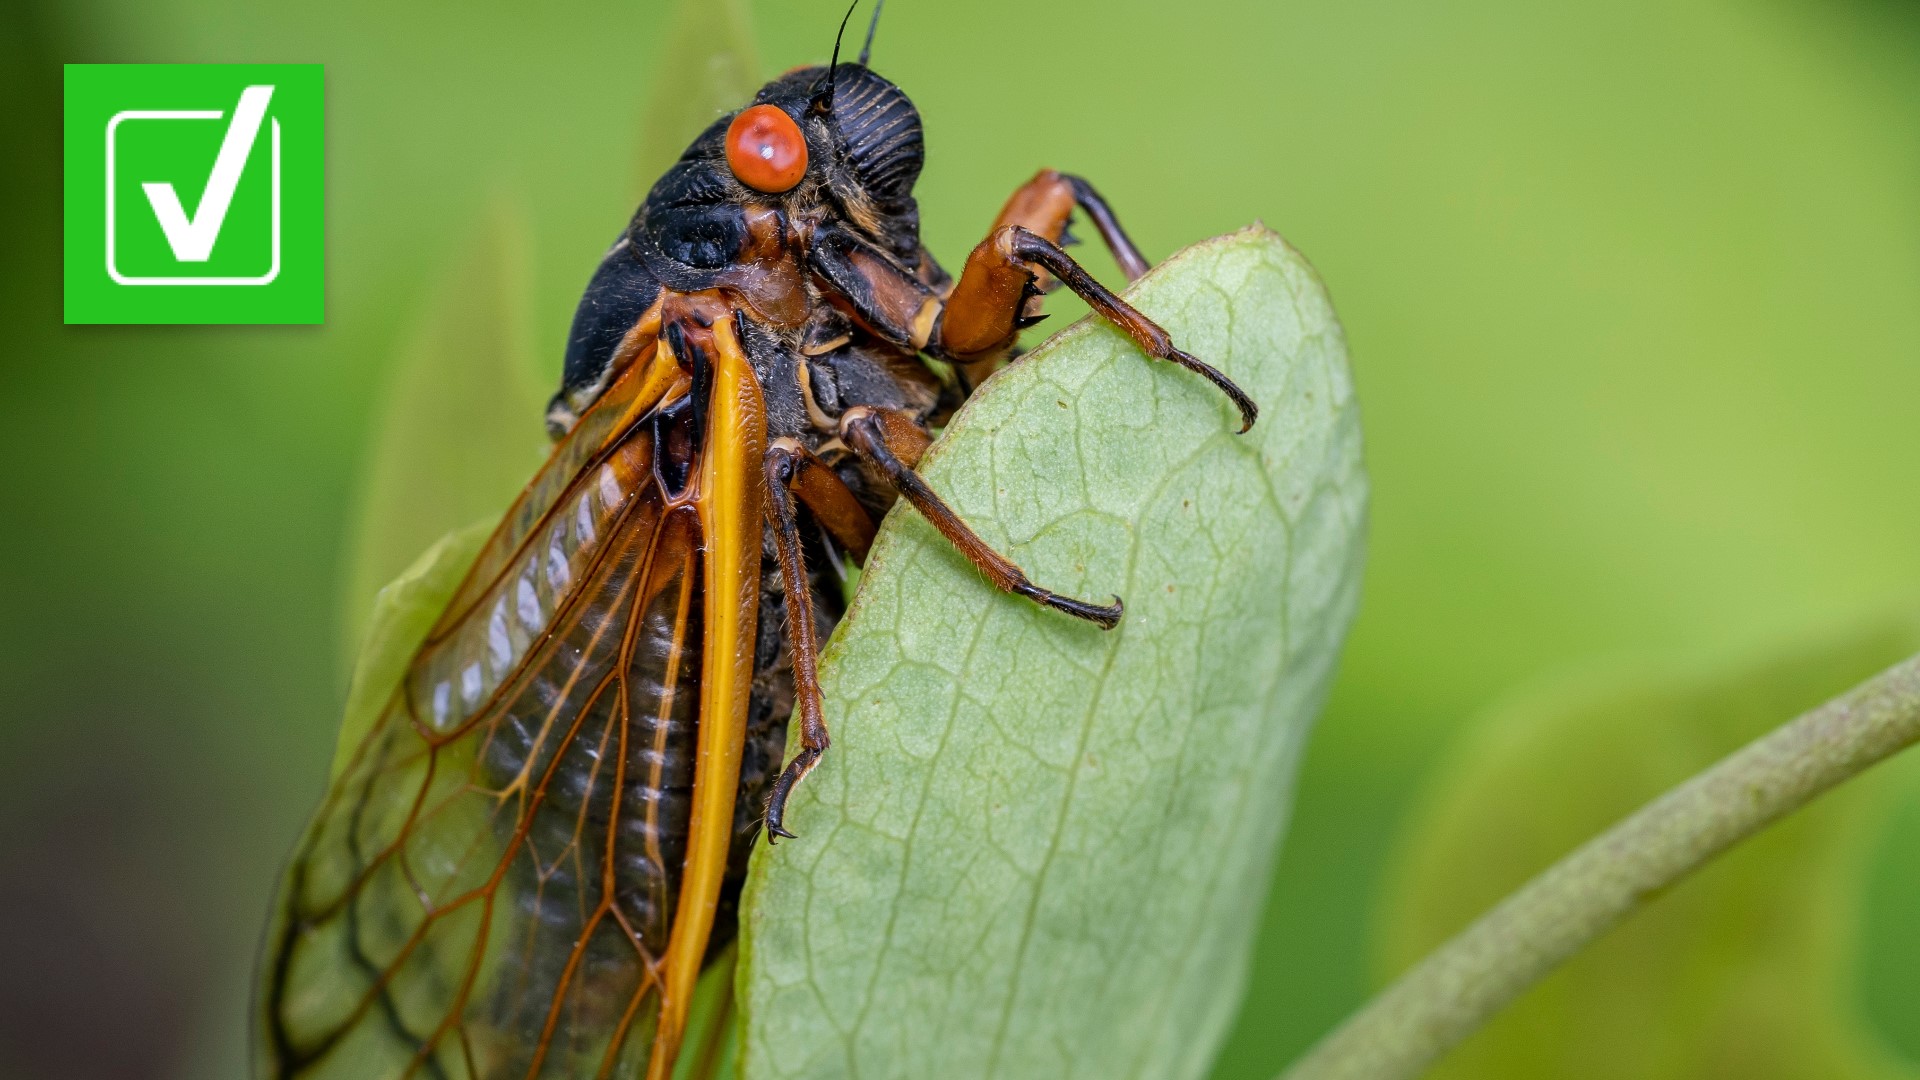 Bodiless ‘zombie cicadas’ infected with parasitic fungus are real